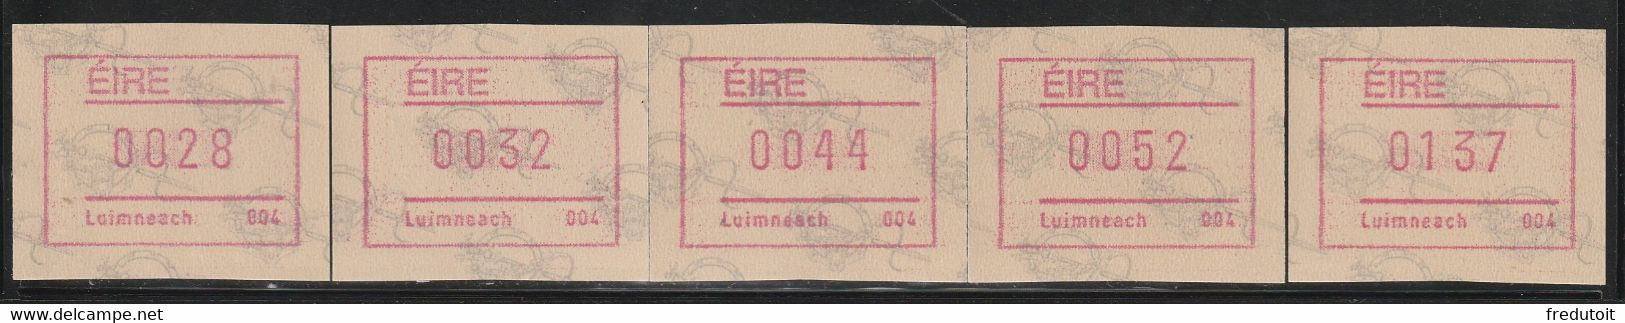 IRLANDE - Timbres Distributeurs / FRAMA  ATM - N°4** (1992) Luimneach 004 - Franking Labels